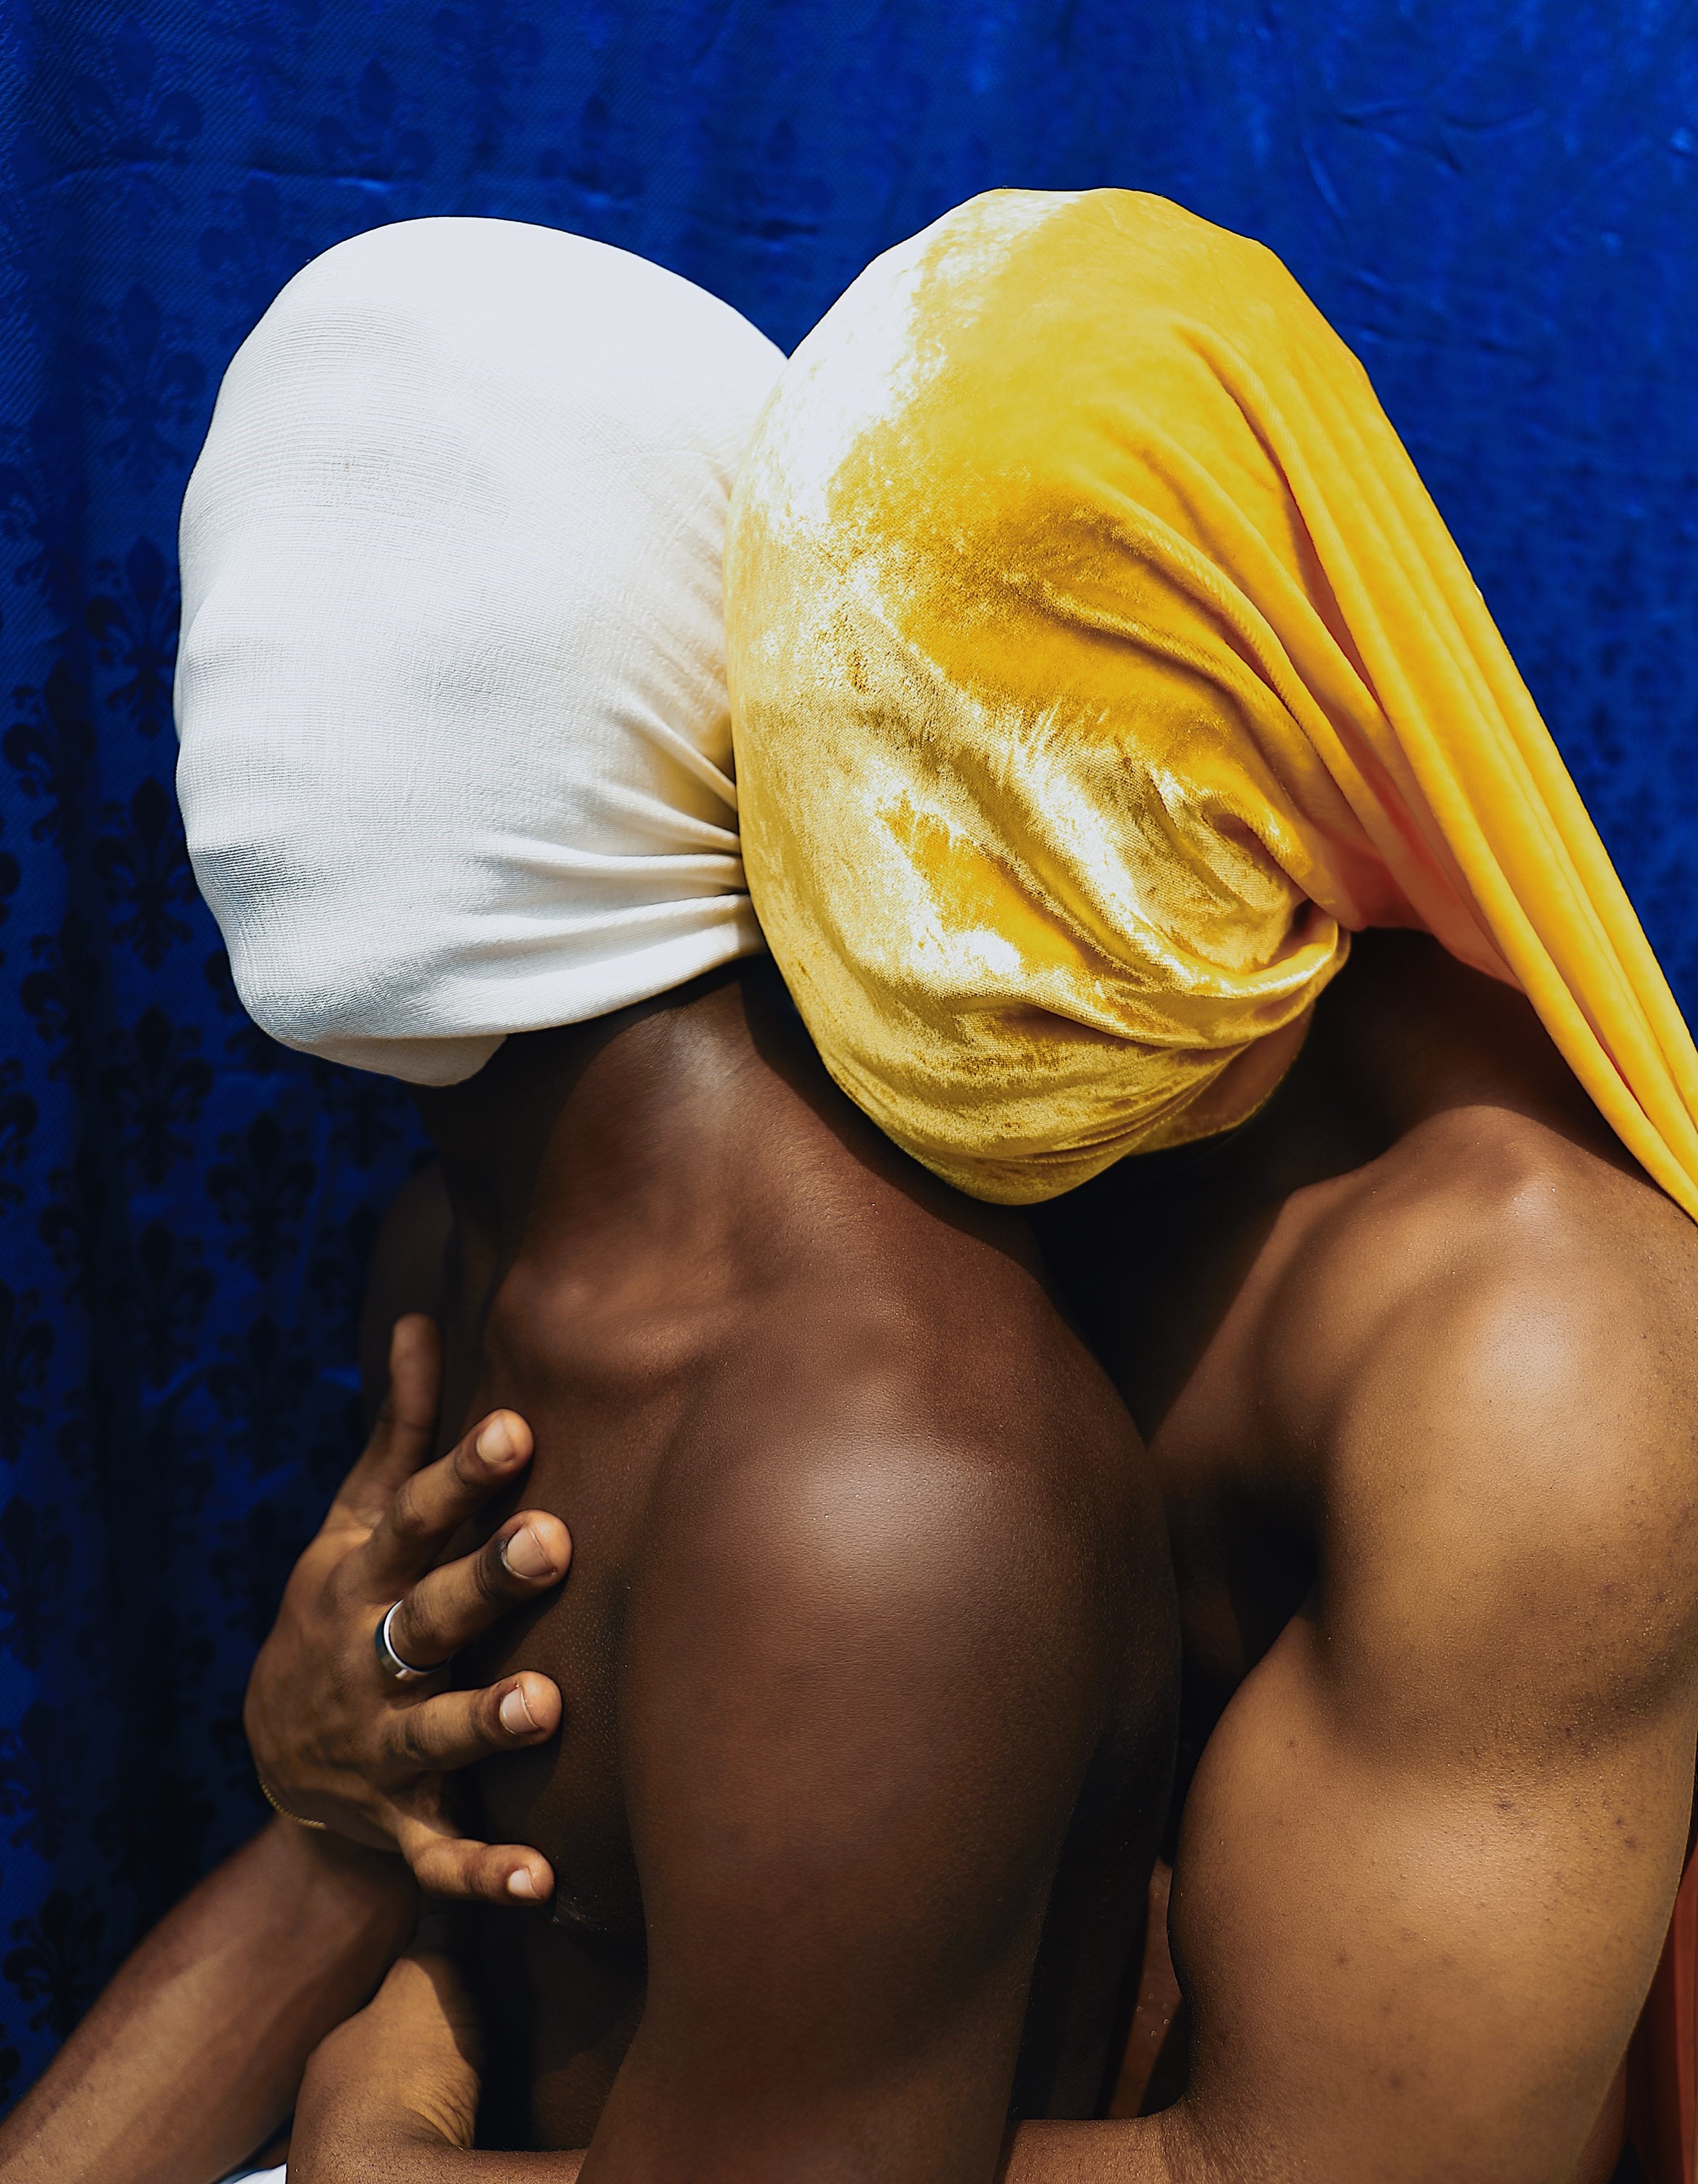 What it's like being a gay porn star in Nigeria | Dazed